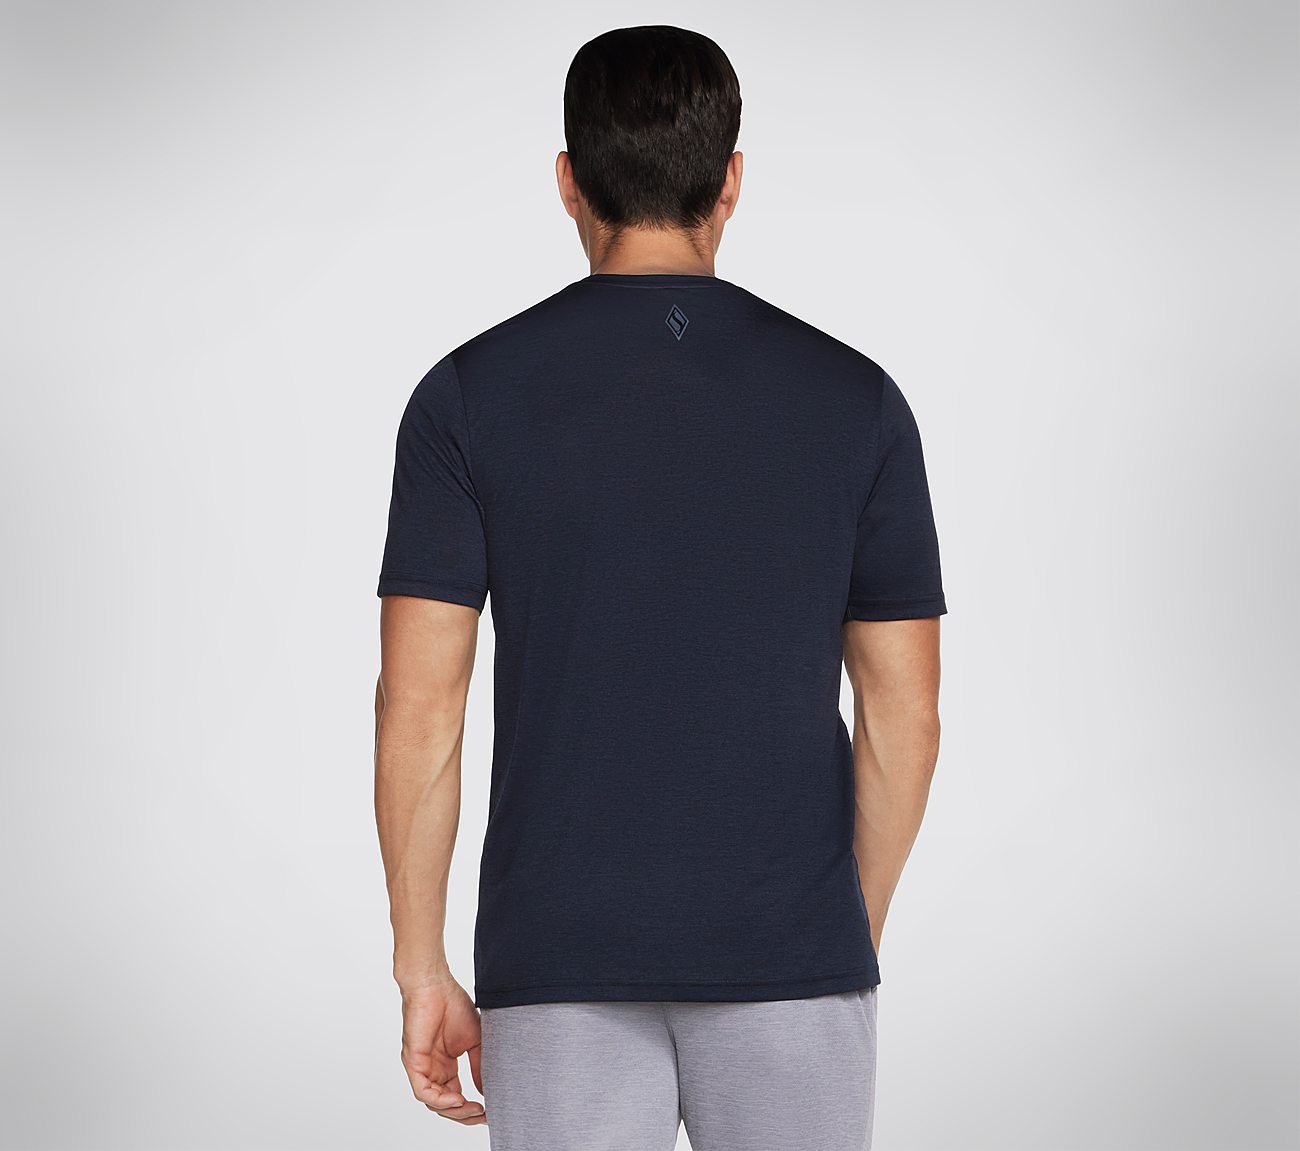 GODRI CHARGE TEE, NNNAVY Apparels Top View